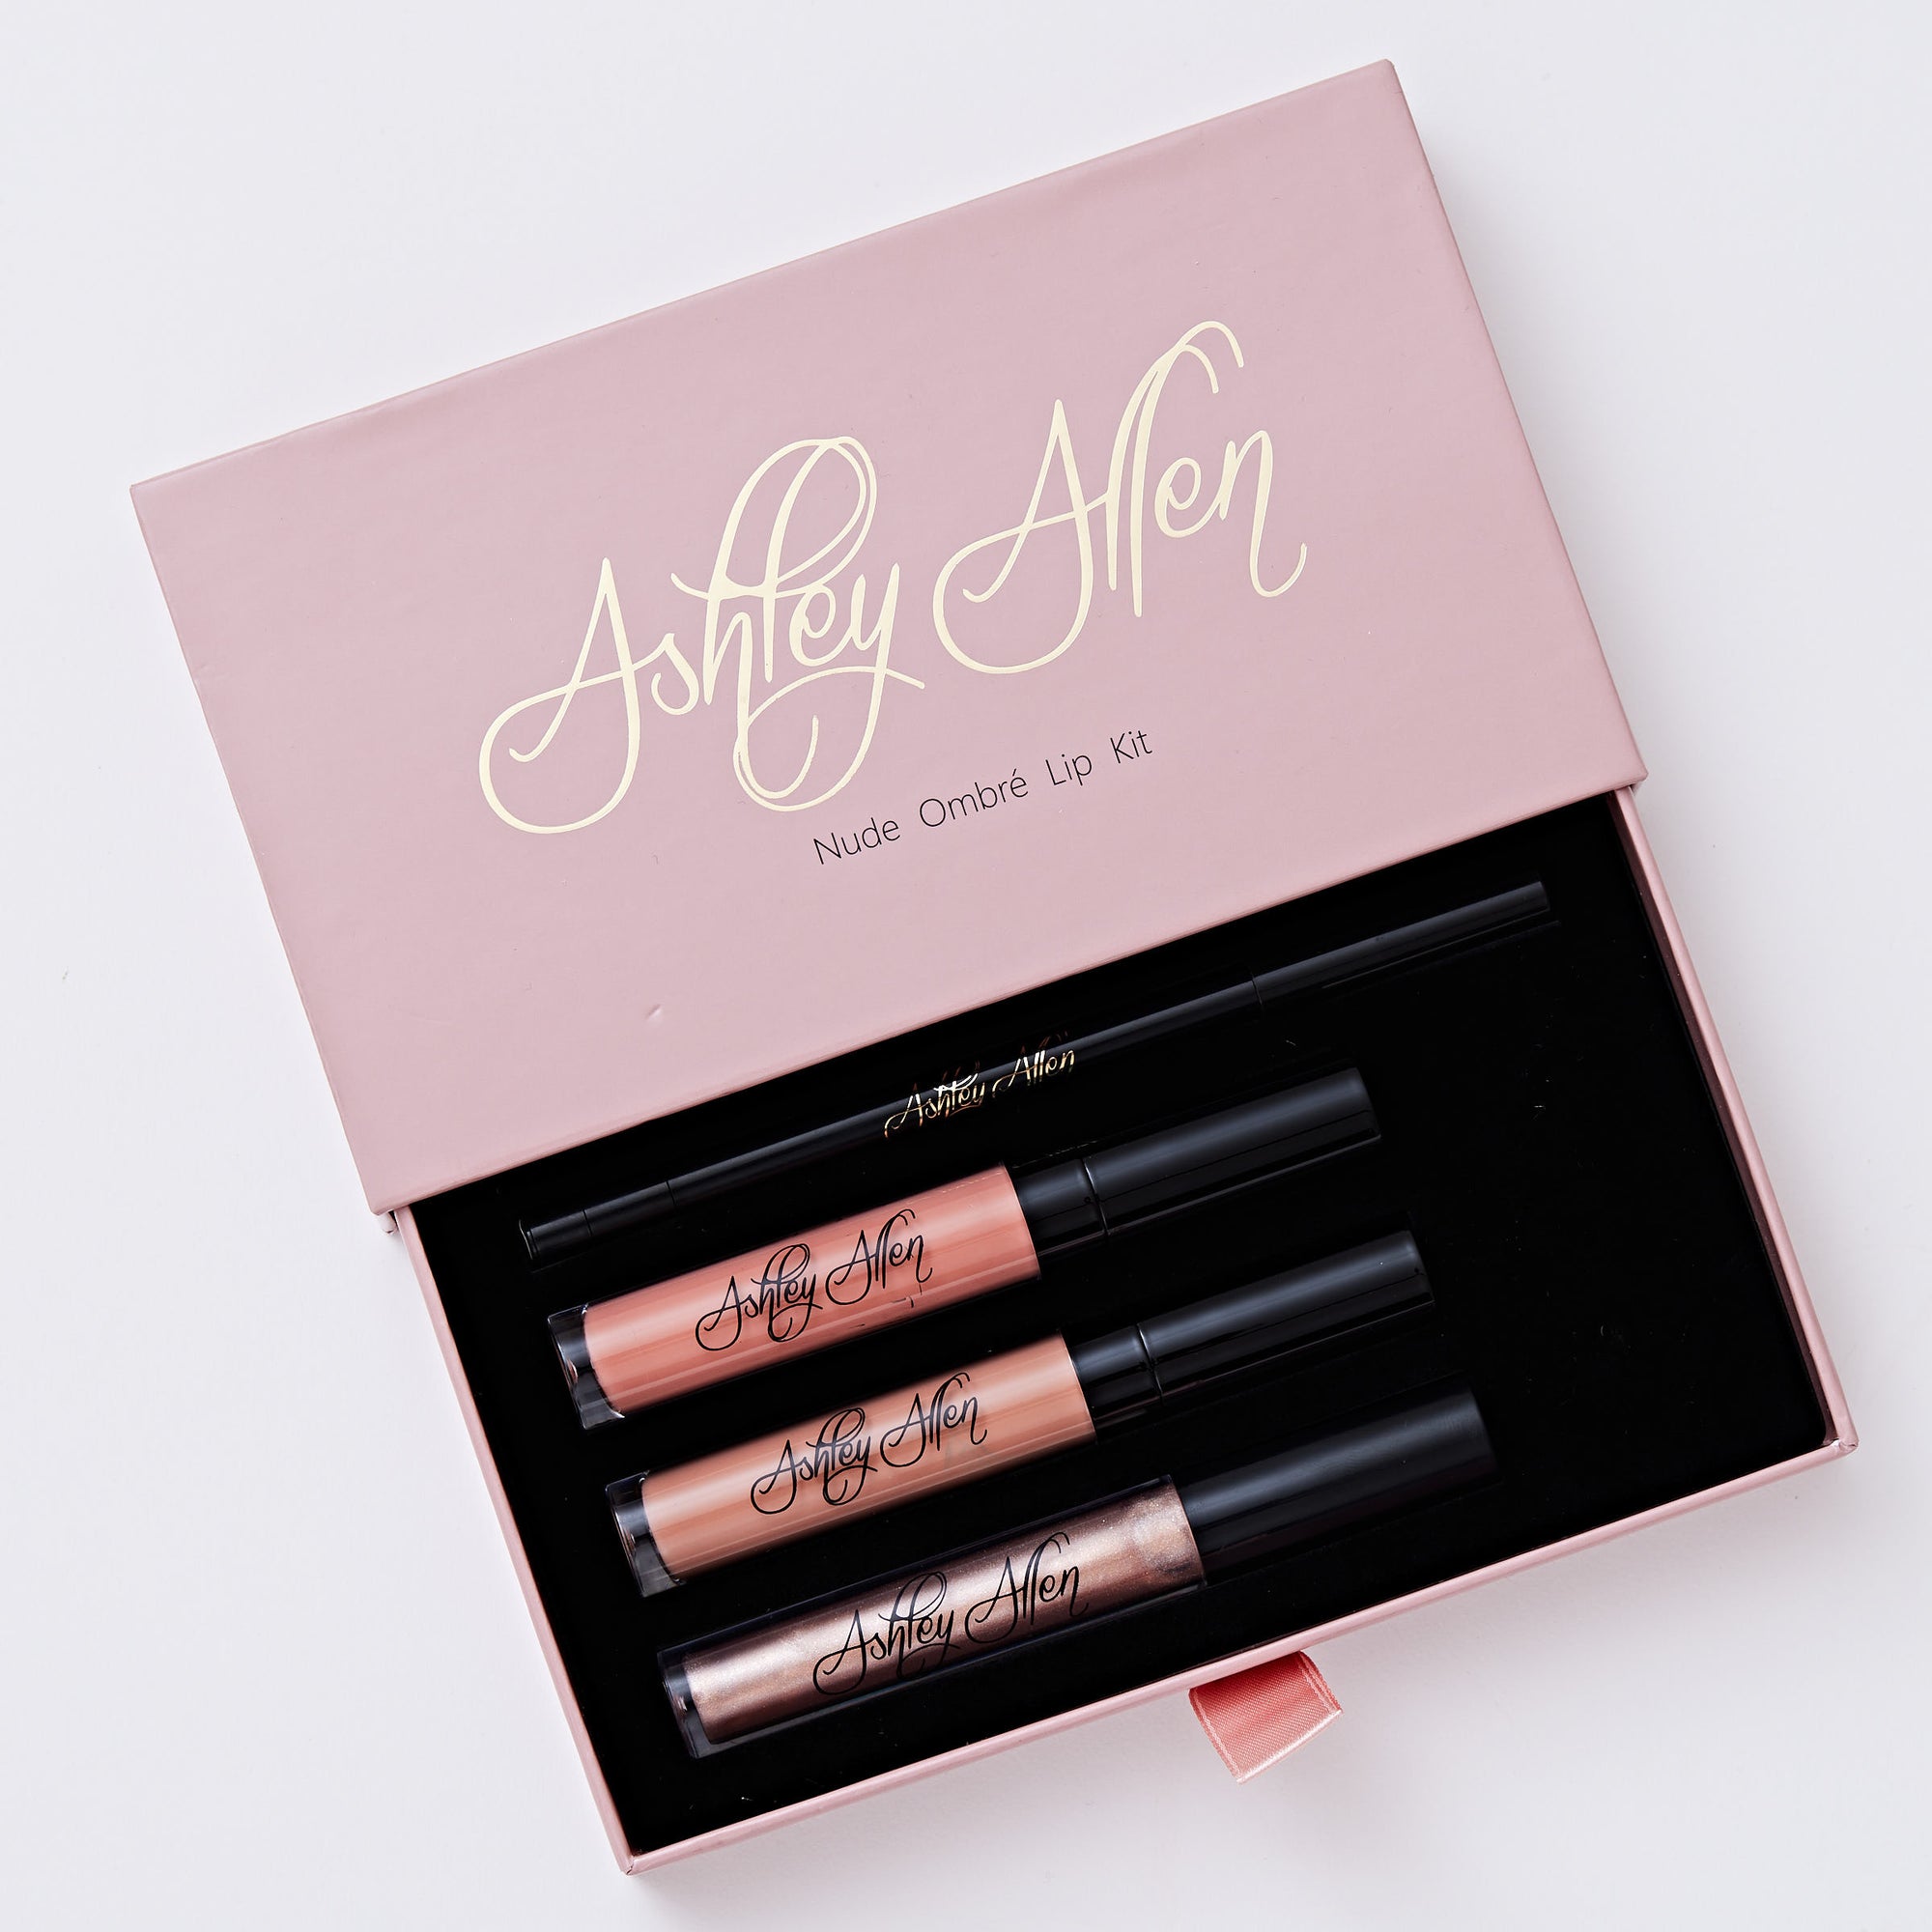 Lip Kit N3 (50% OFF) will be $40.00 Activated at checkouts